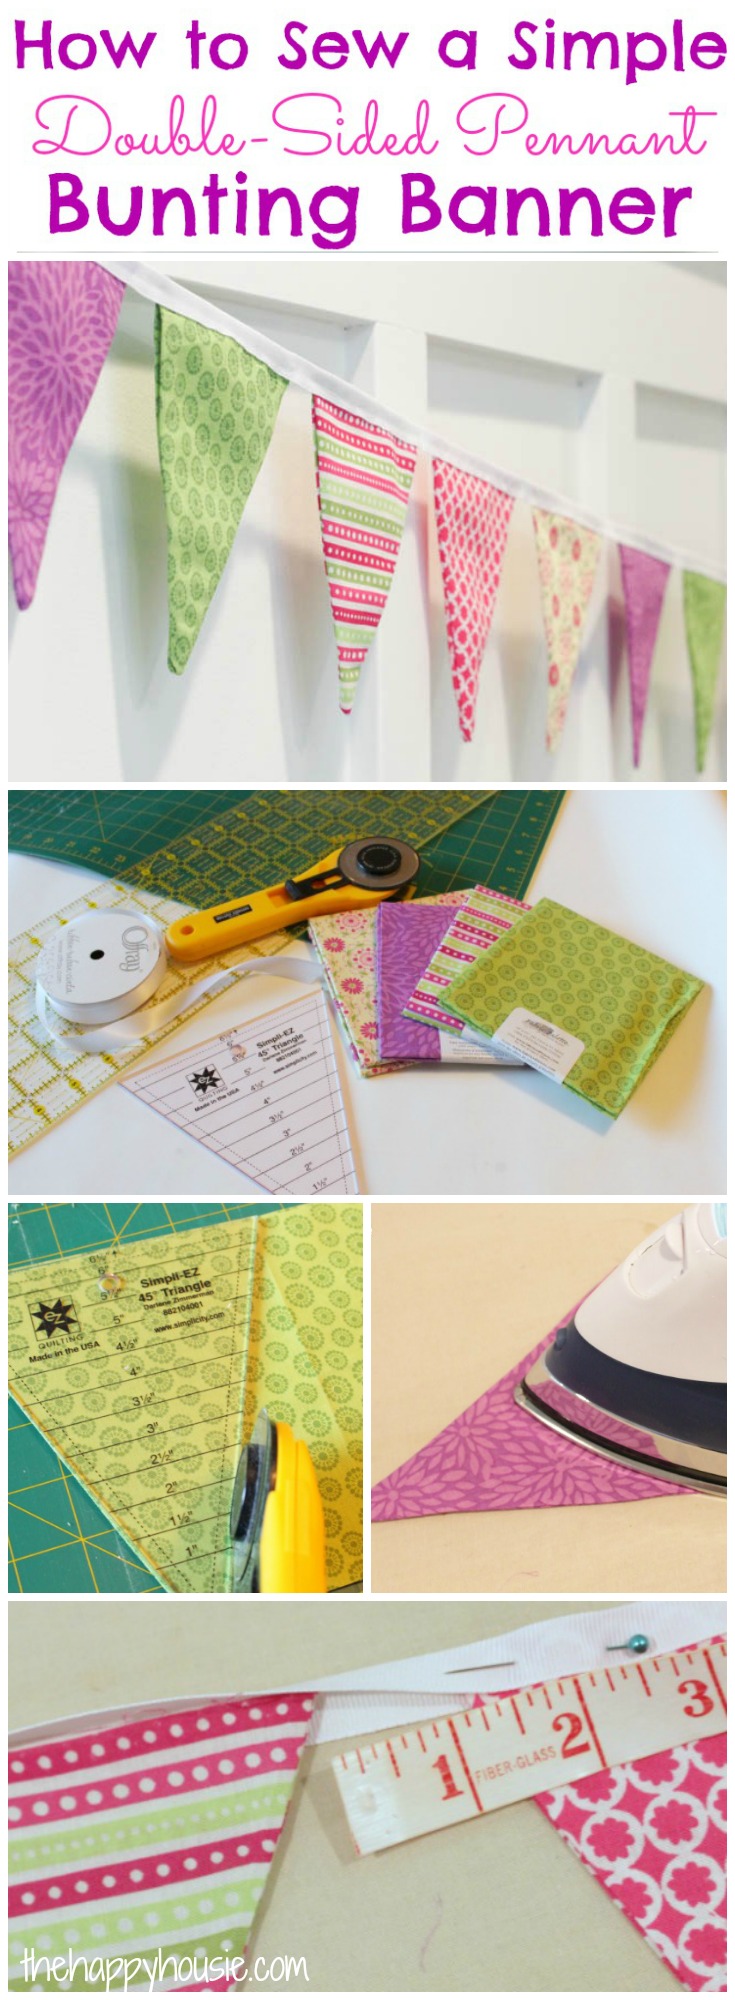 How to sew a simple bunting banner poster.